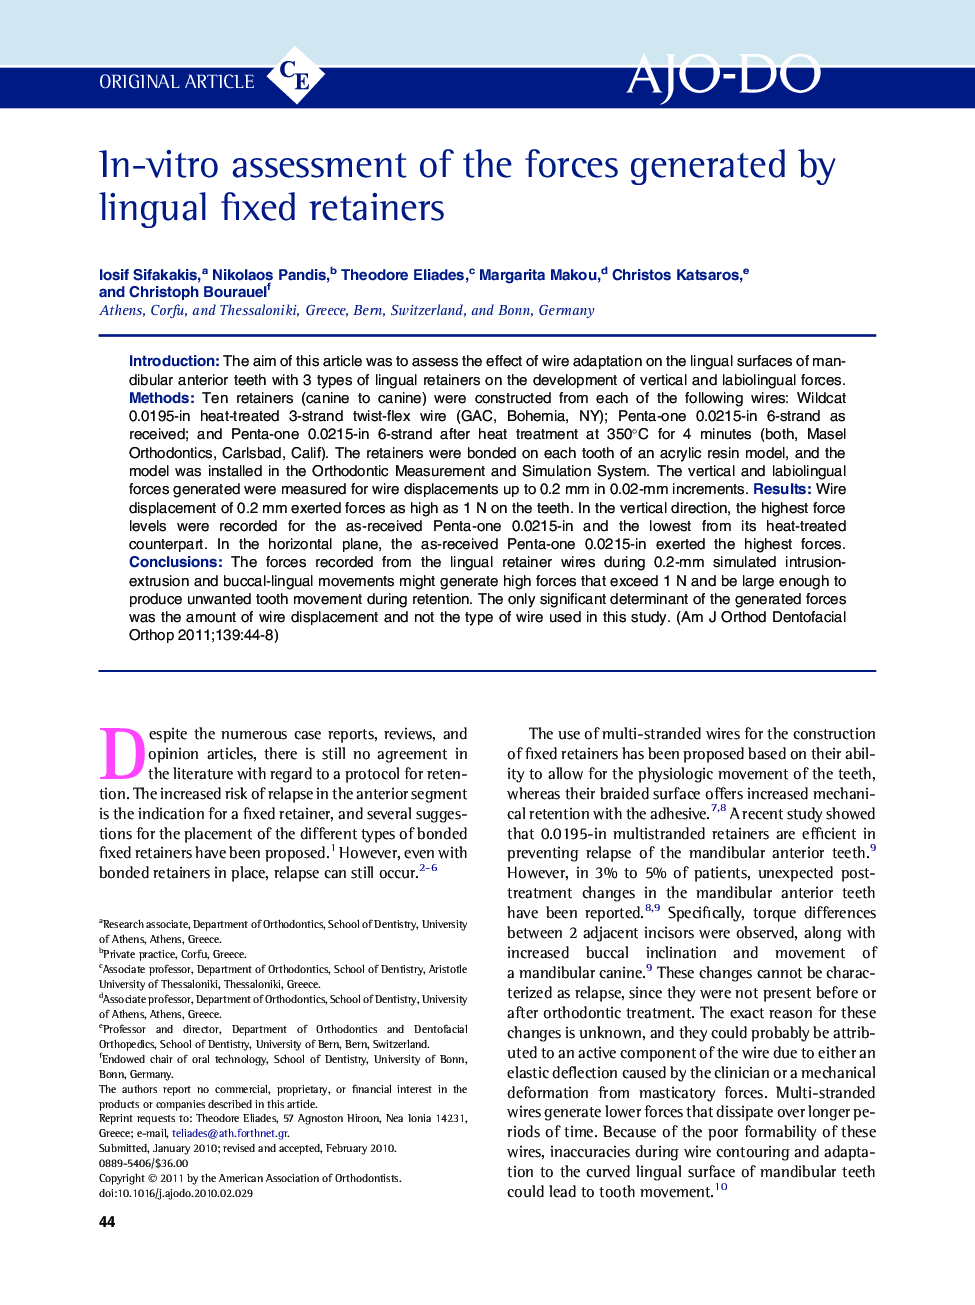 In-vitro assessment of the forces generated by lingual fixed retainers 